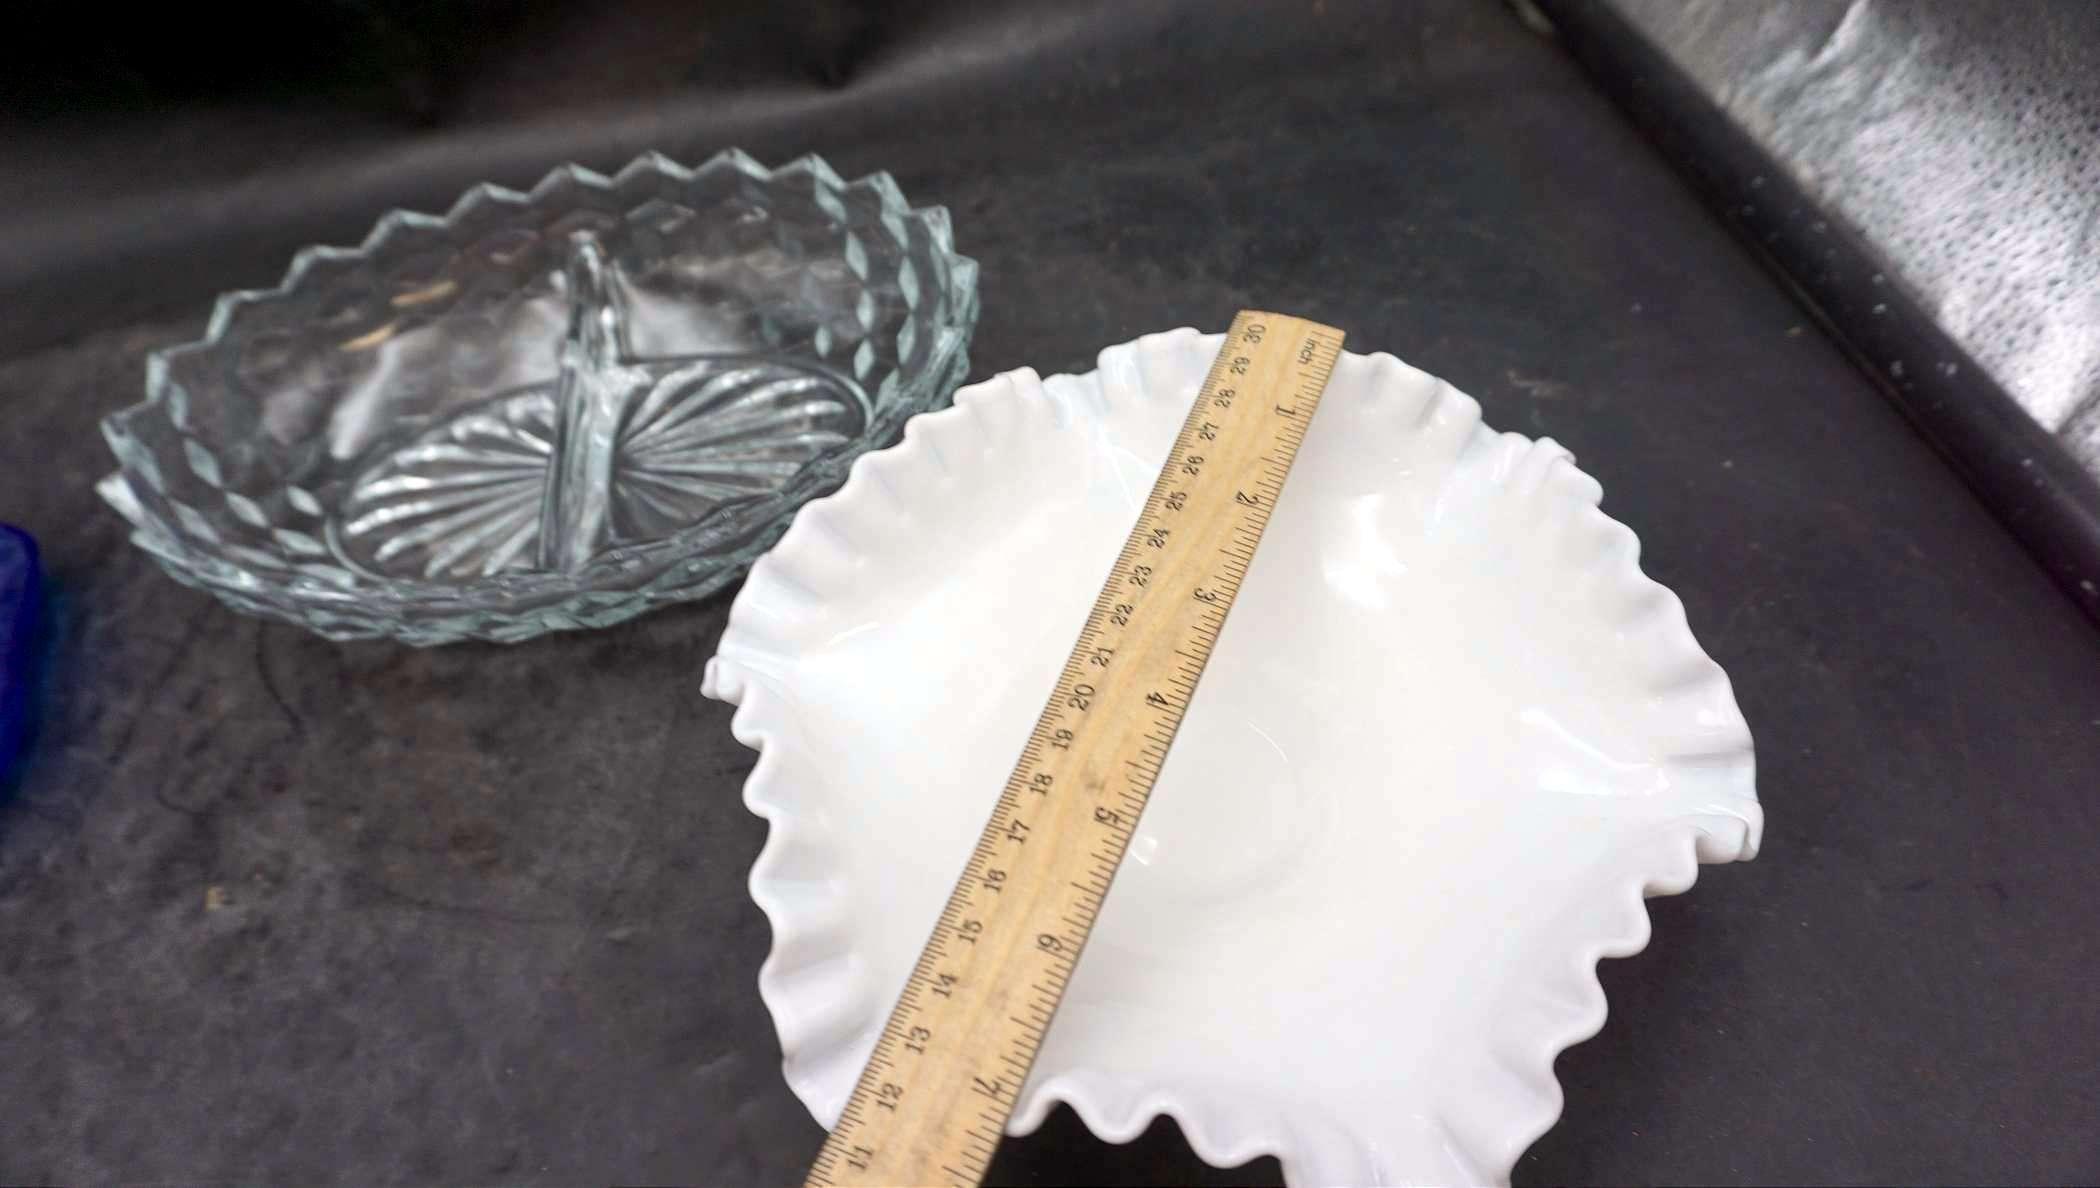 Blue Flower Tray (Chipping), Divided Glass Dish & White Hobnail Ruffle Bowl